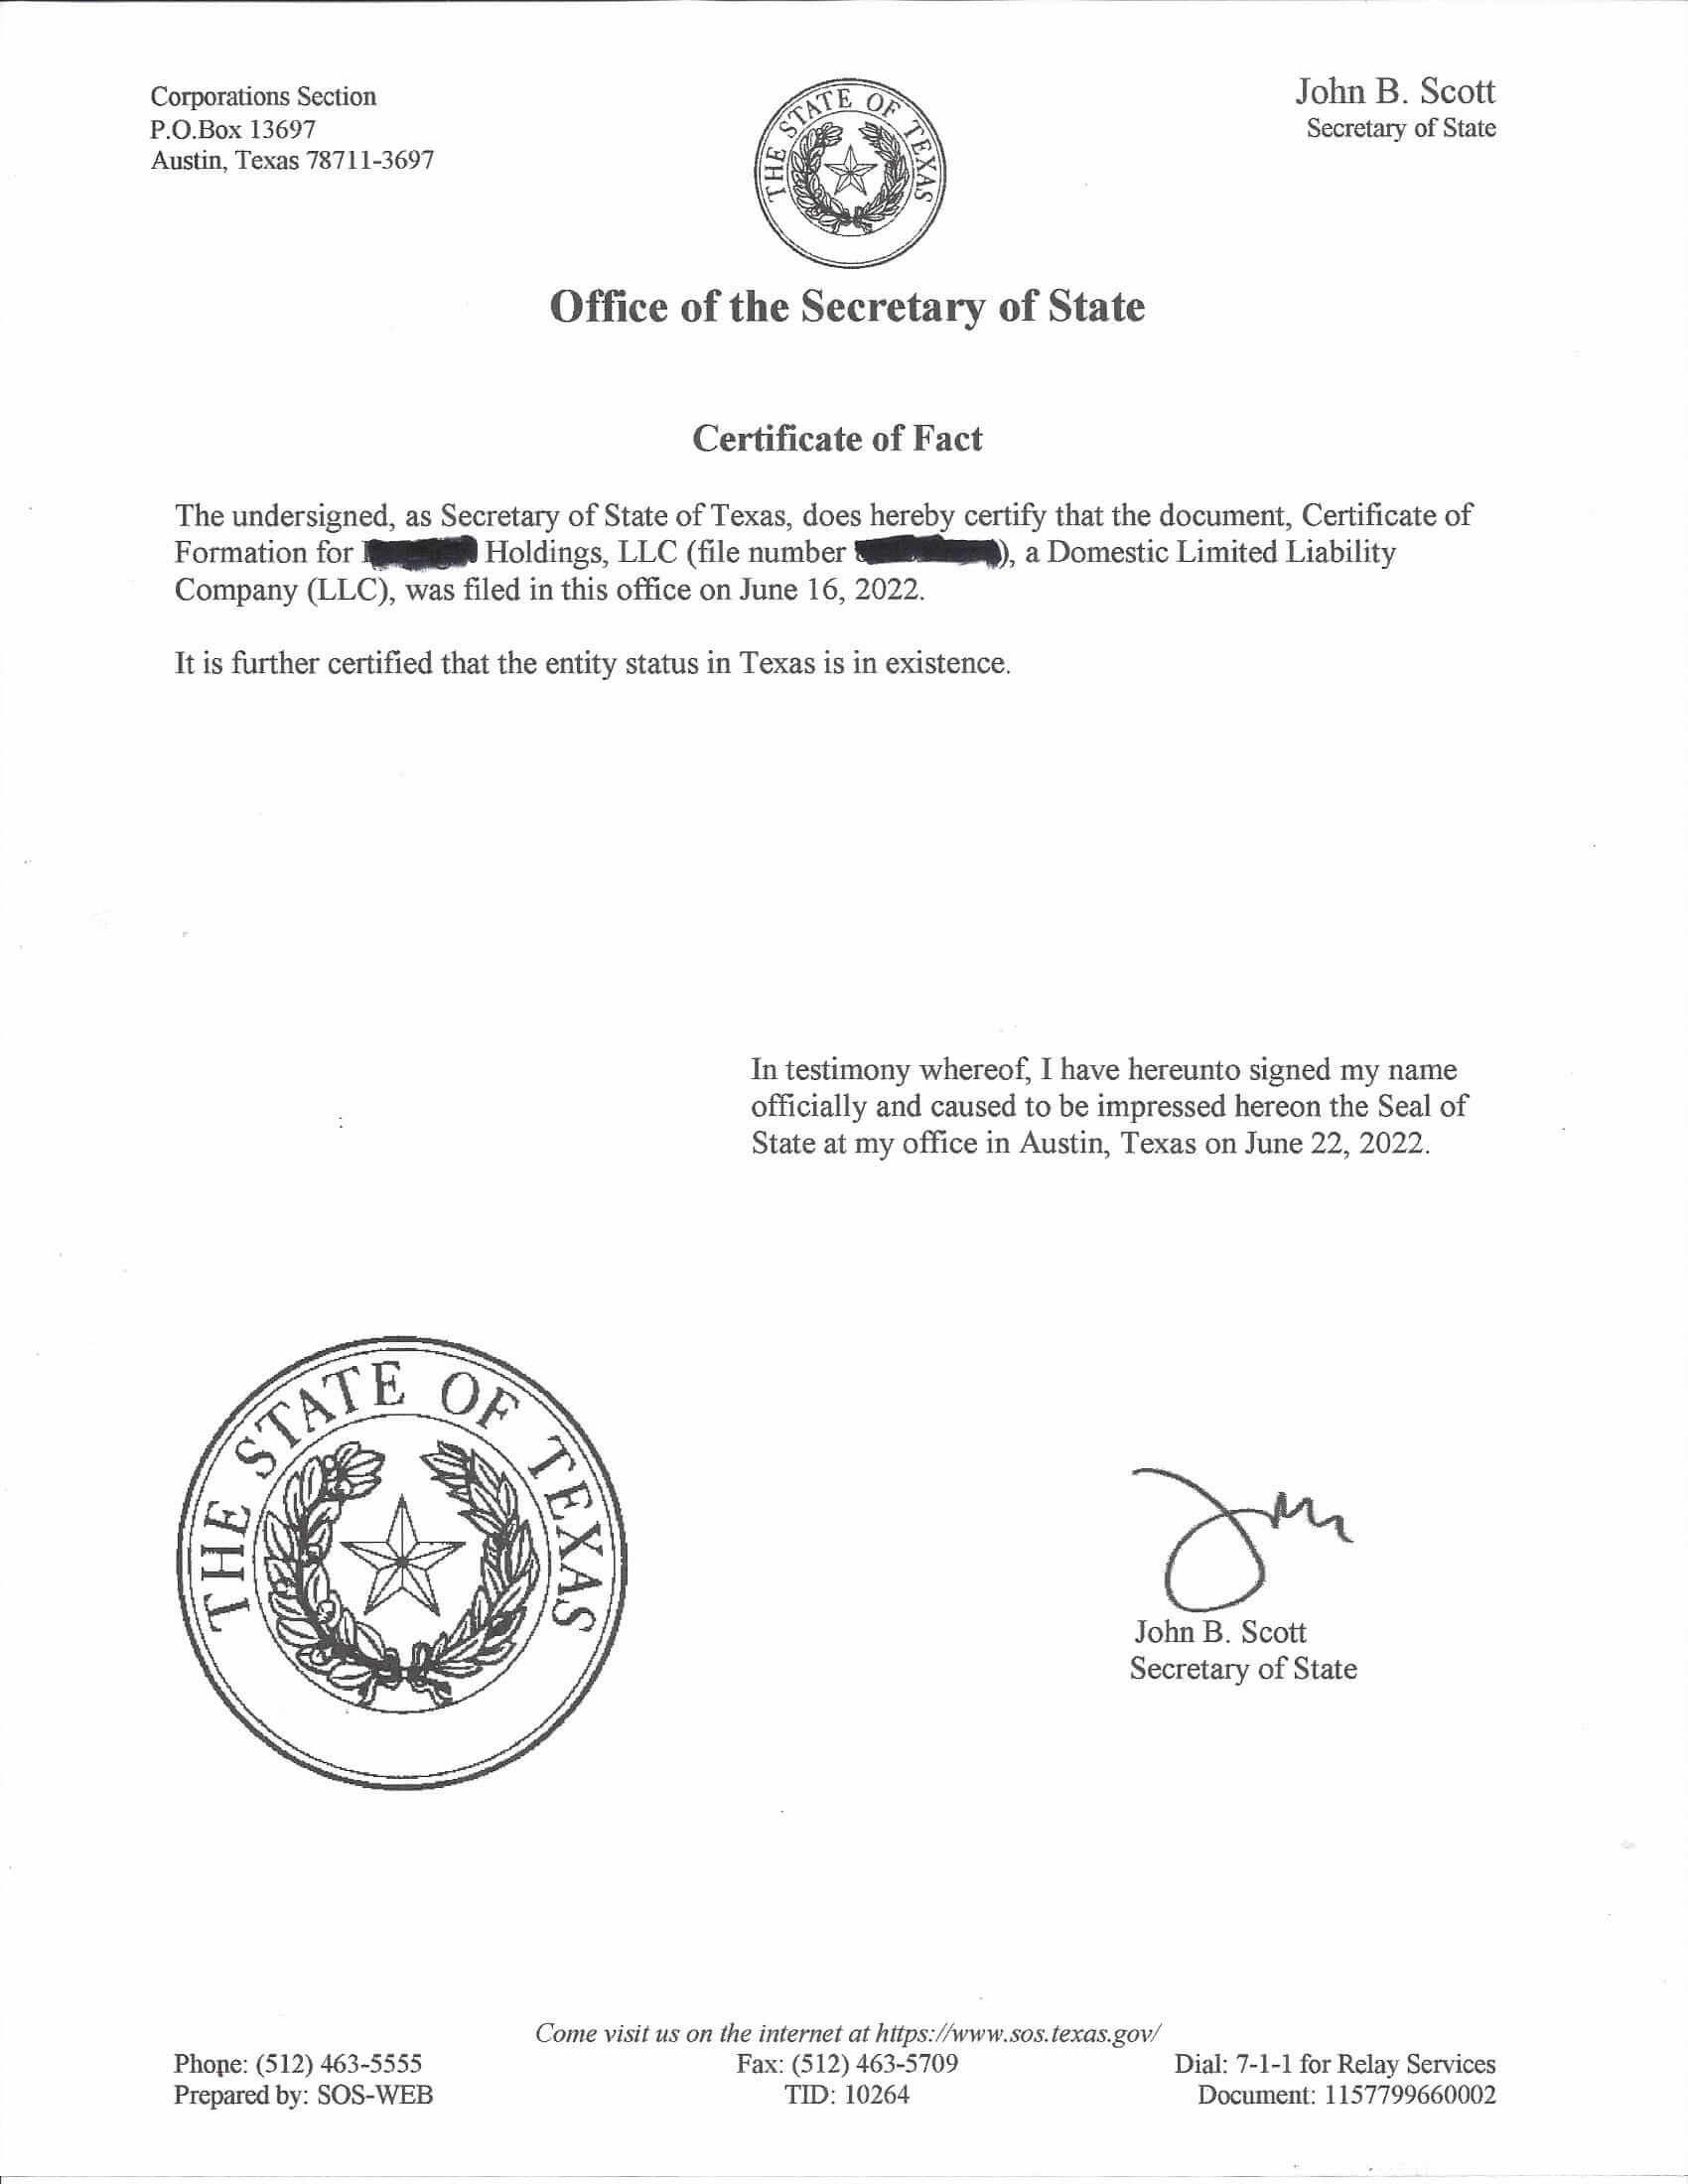 Texas Certificate of Fact Example